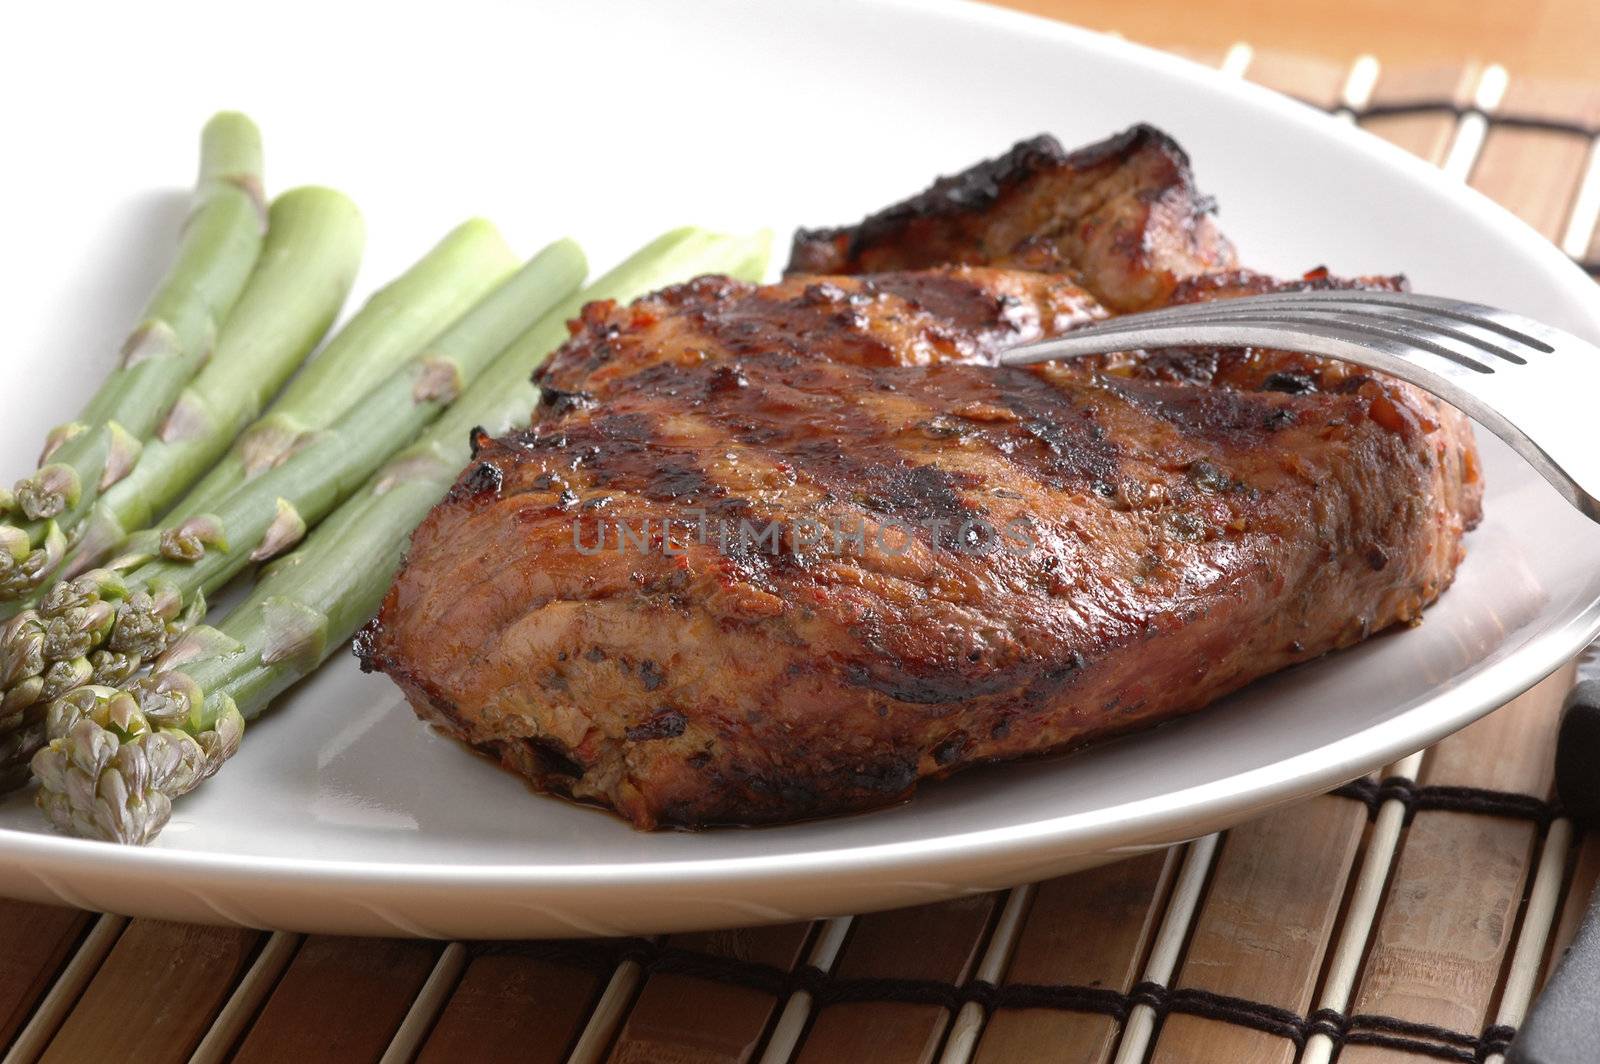 Perfectly grilled pork chop on a plate with asparagus.